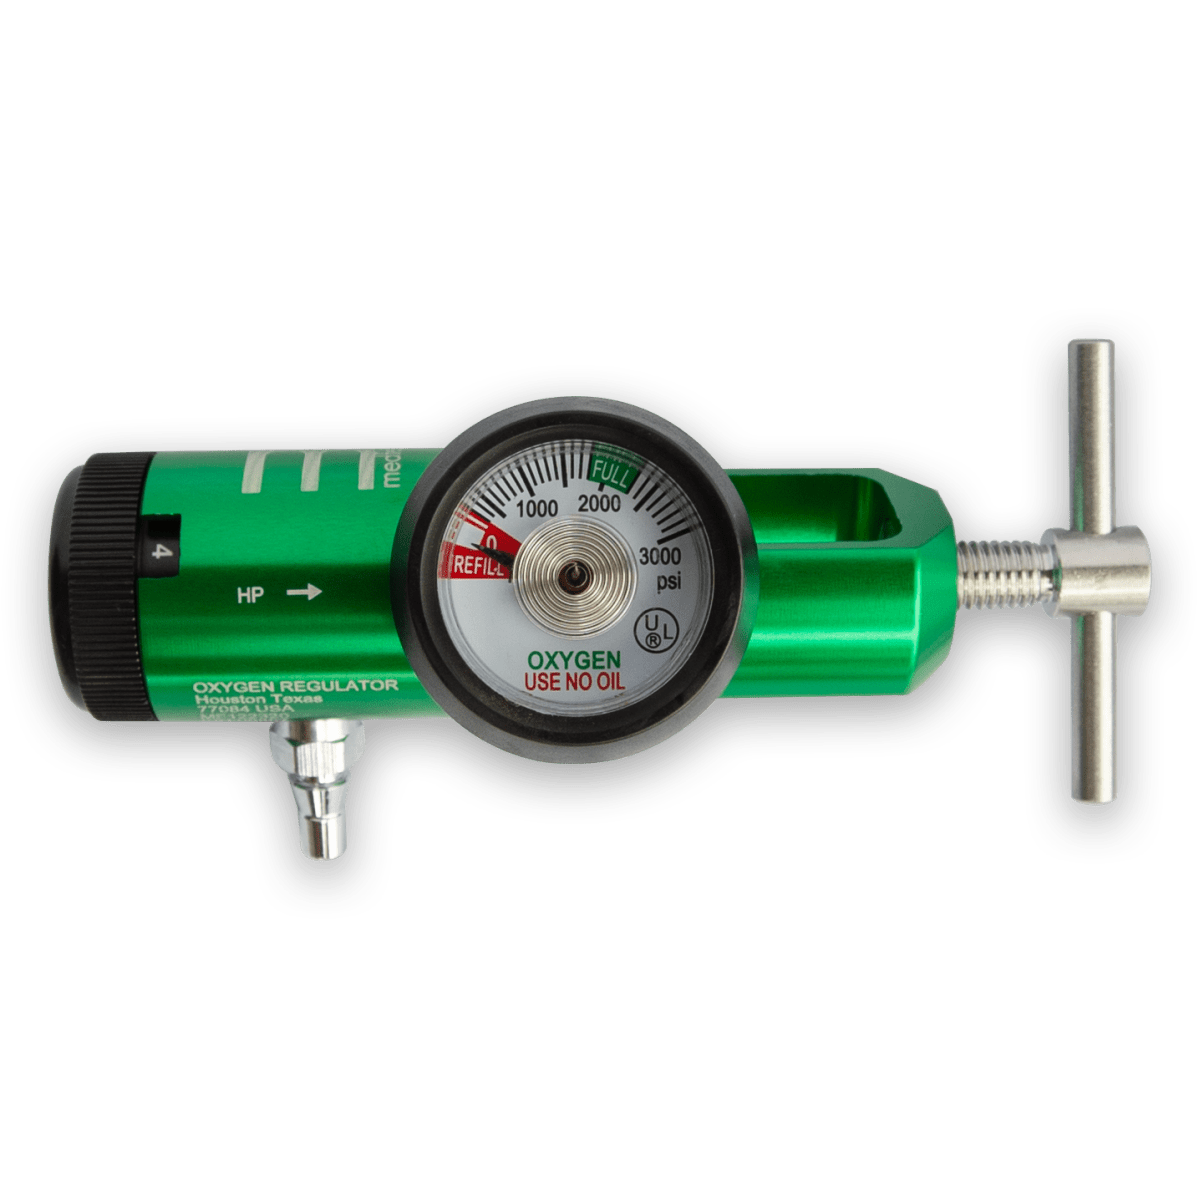 CGA 870 Oxygen Regulator with single barb outlet, 0-15LPM flow range. Lightweight anodized aluminum design with brass conduits for durable and dependable home use on transparent background. 